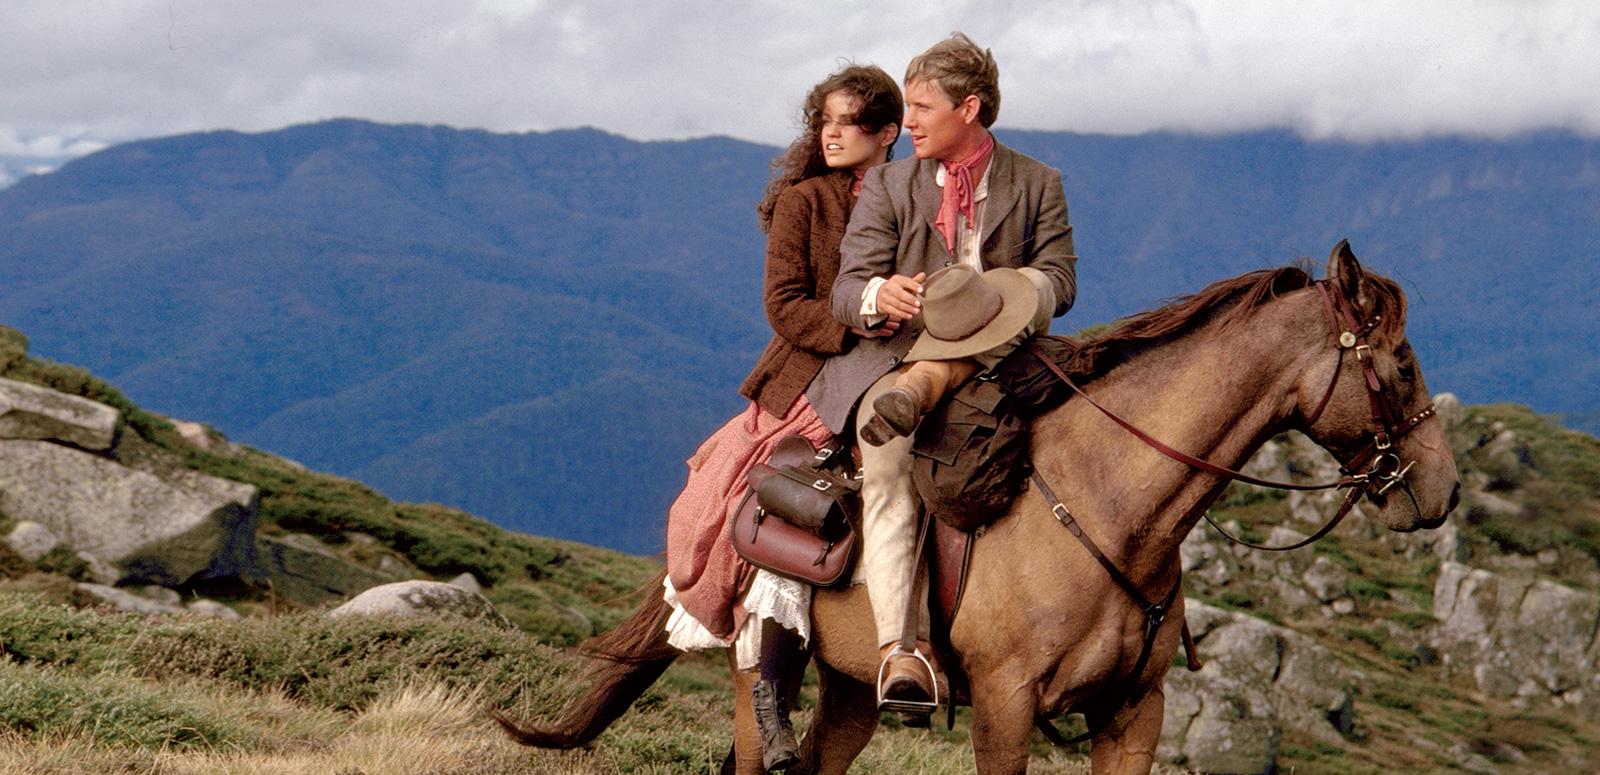 Sigrid Thornton and Tom Burlinson on a chestnut coloured horse with mountains in the background in a scene from 'The Man From Snowy River'.